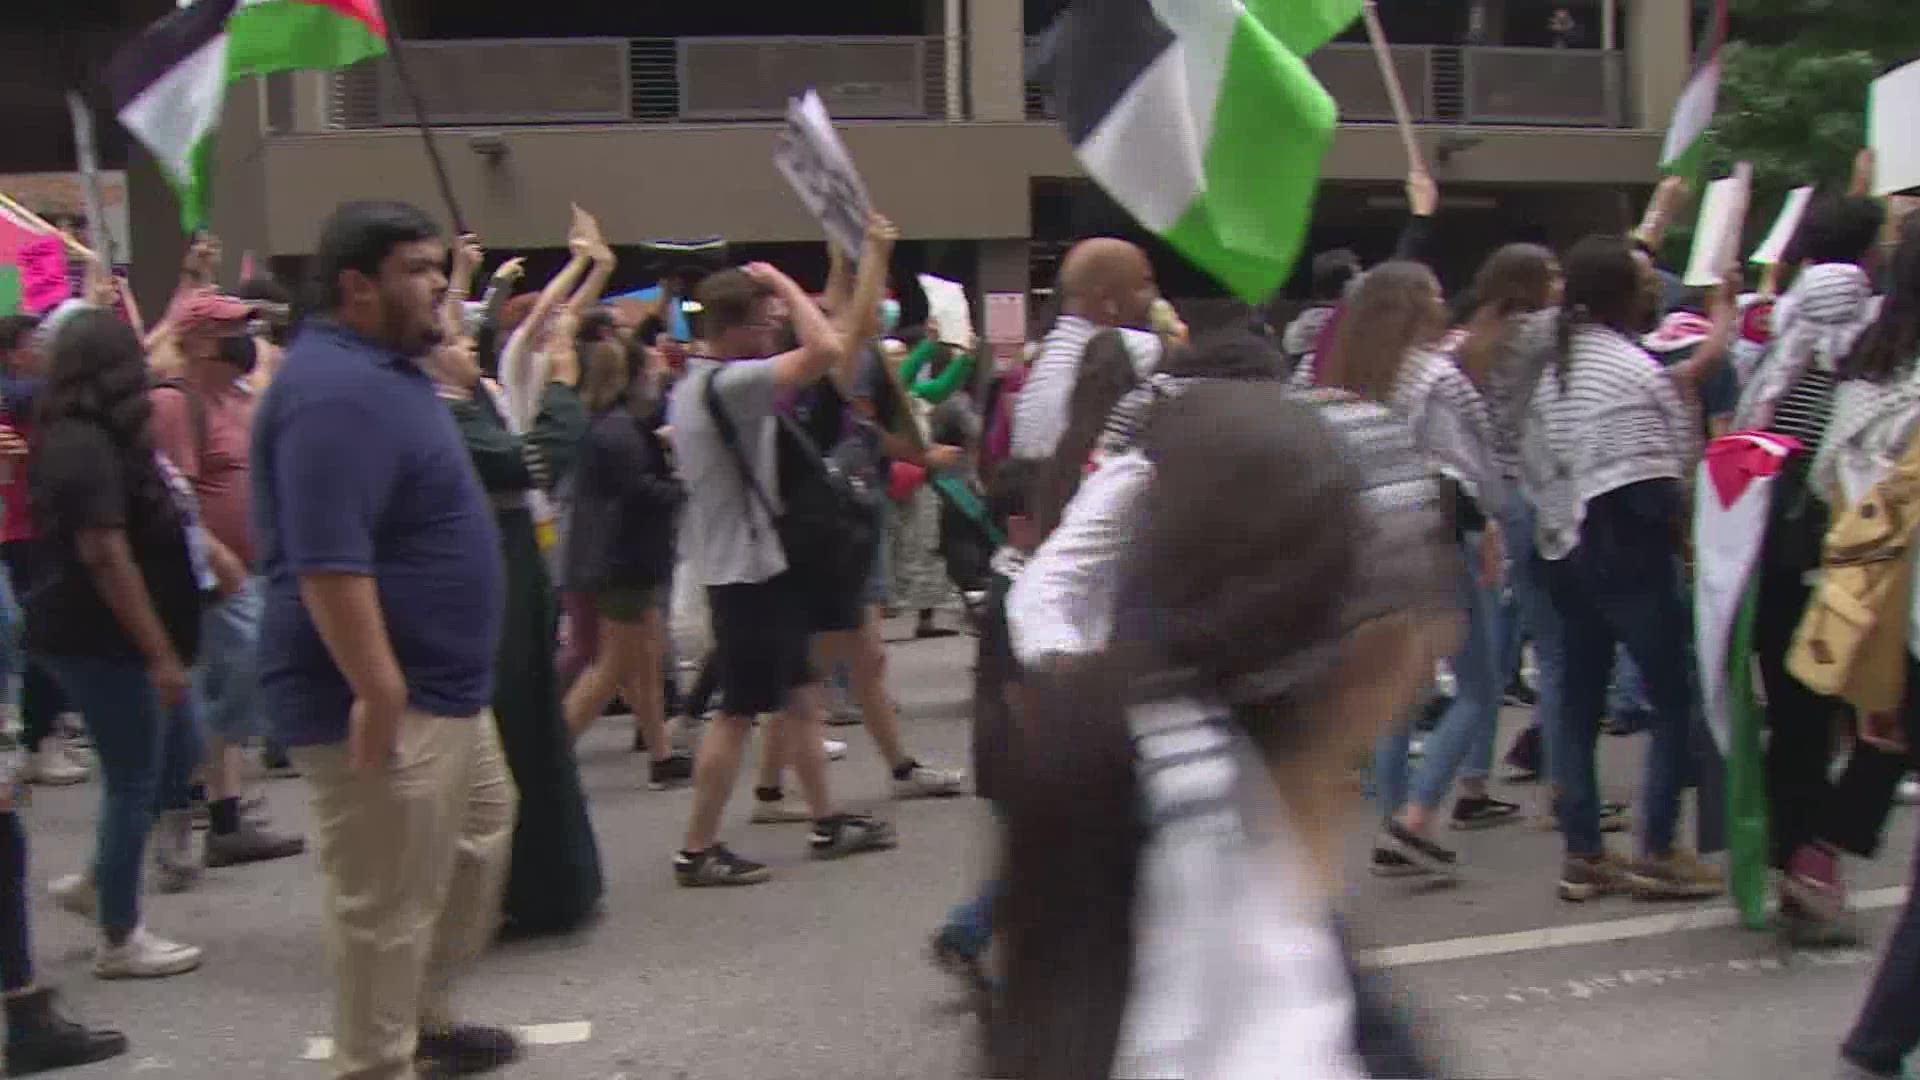 On Sunday afternoon, thousands of Pro-Palestinians took to the streets of downtown Dallas, chanting "Free Palestine" and holding up signs throughout the streets.